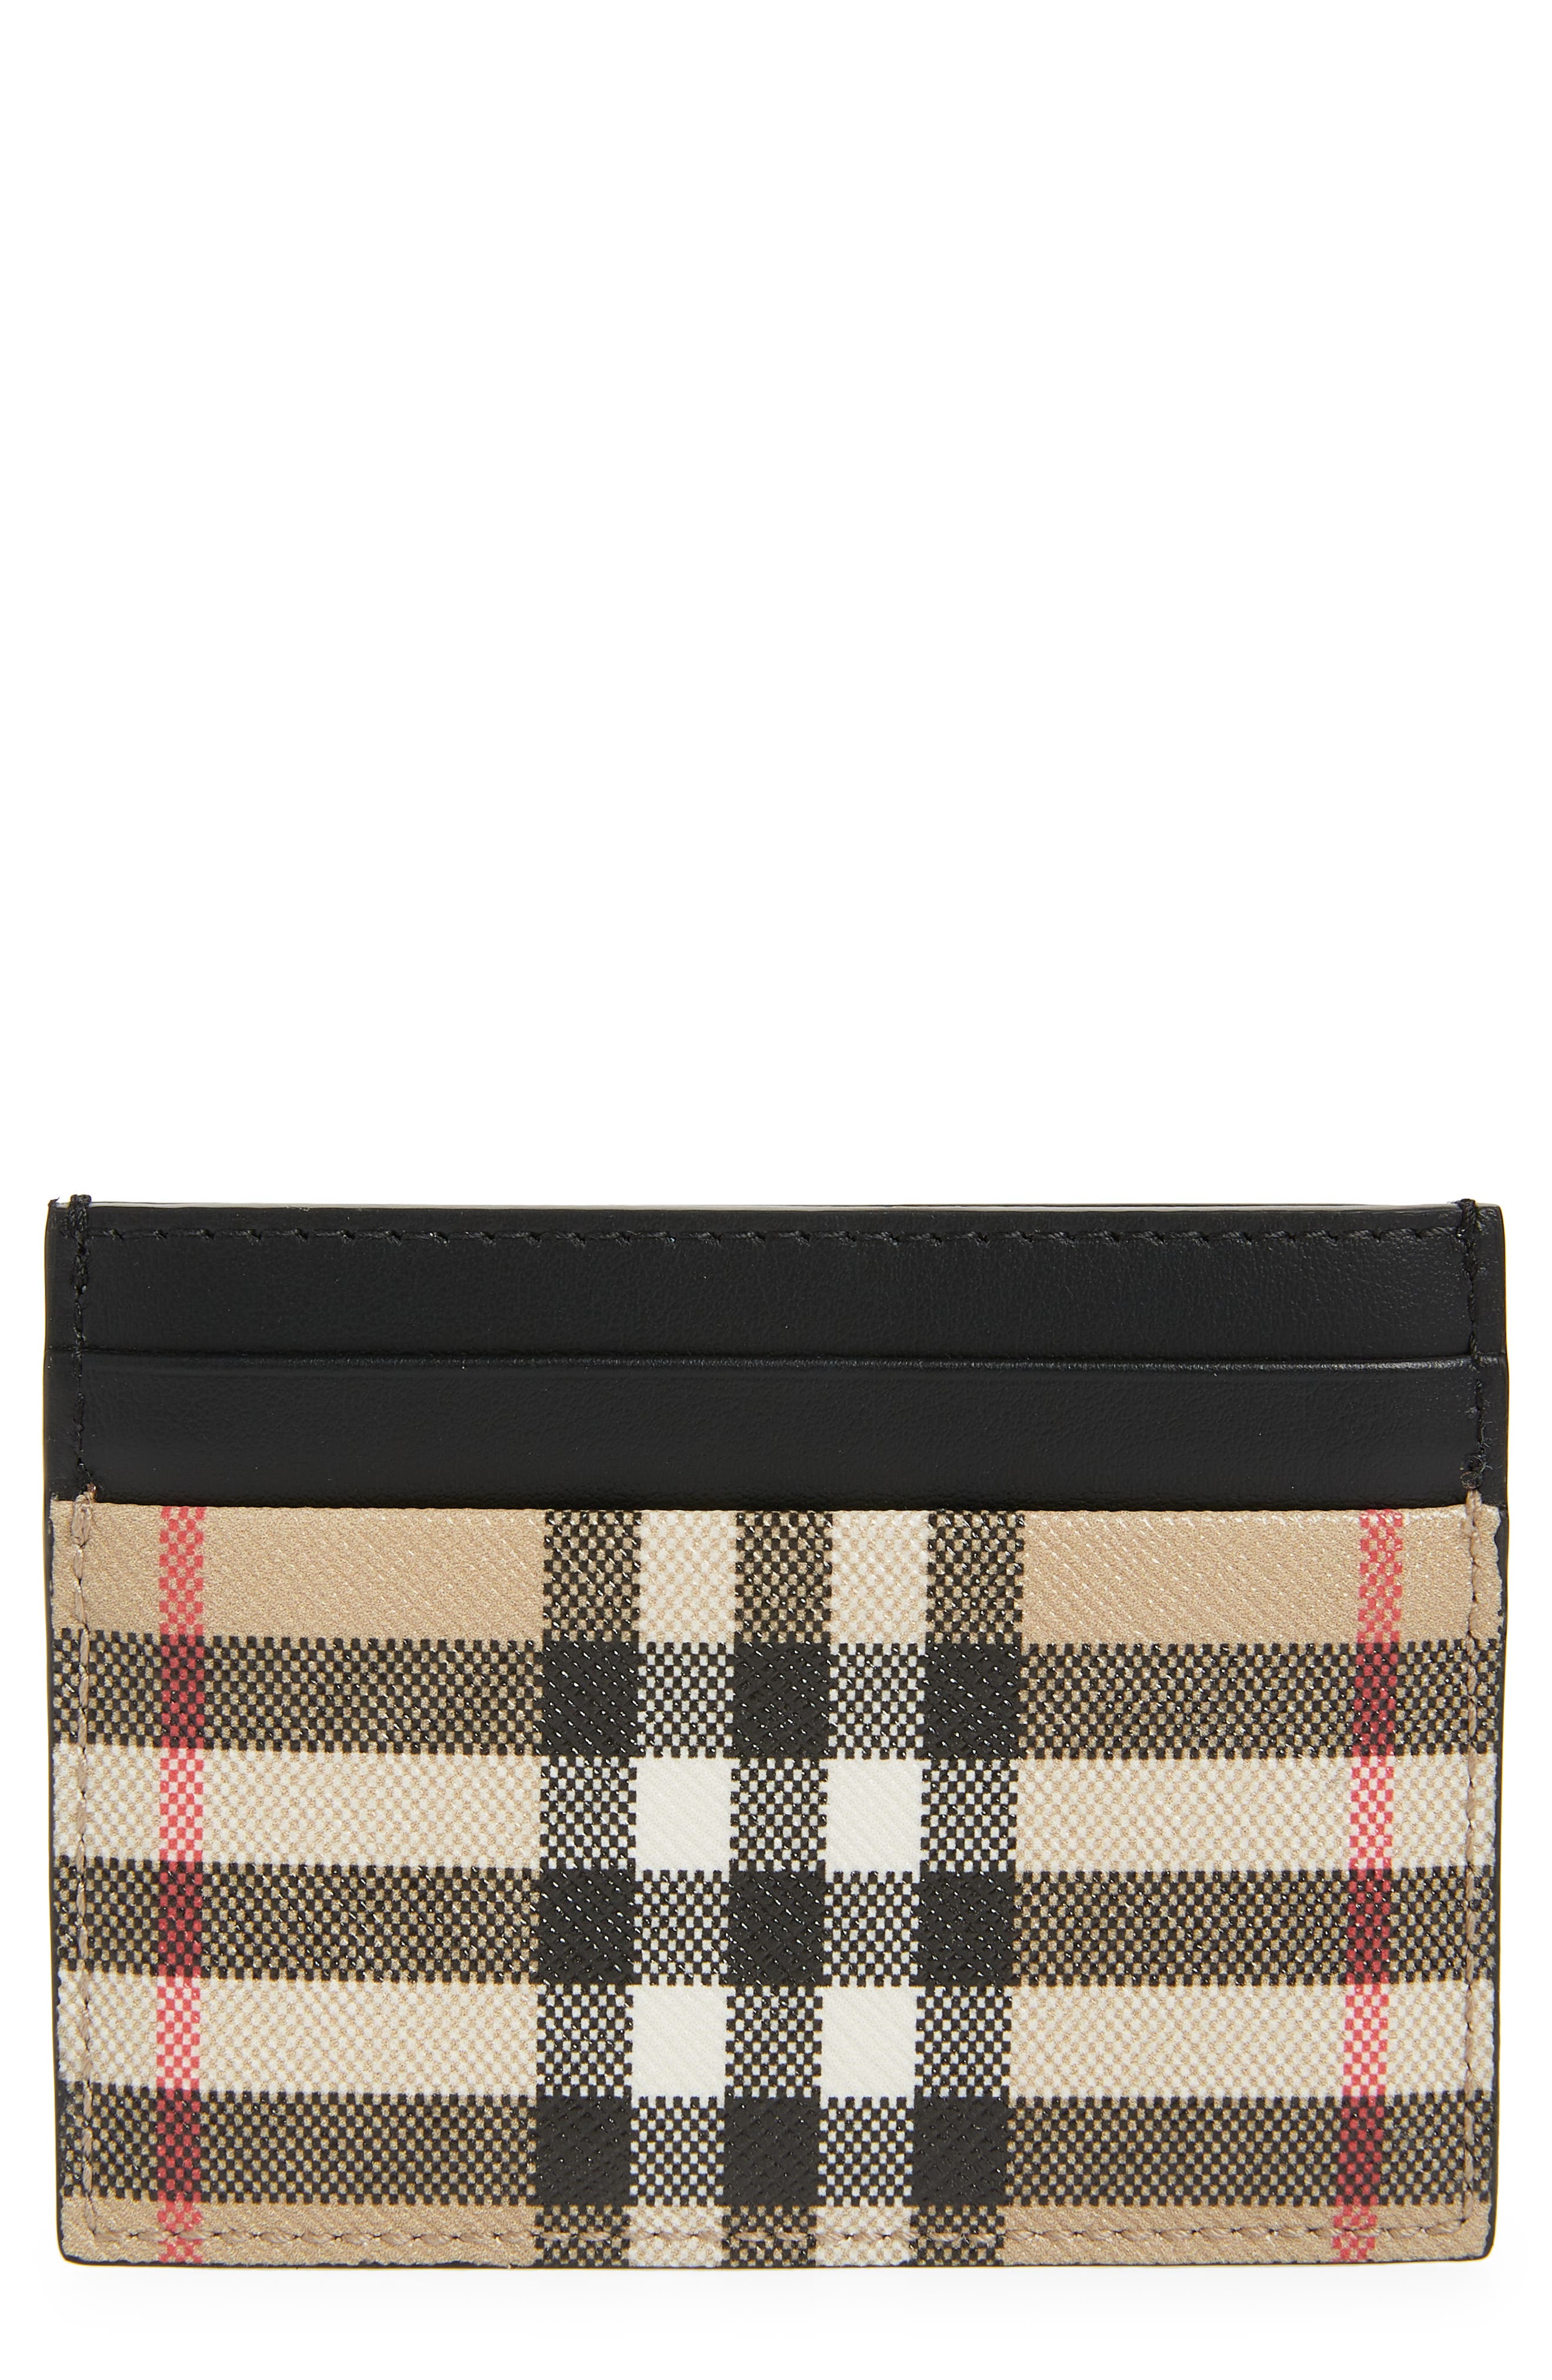 Burberry Sandon Vintage Check Leather Card Case in Archive Beige at Nordstrom